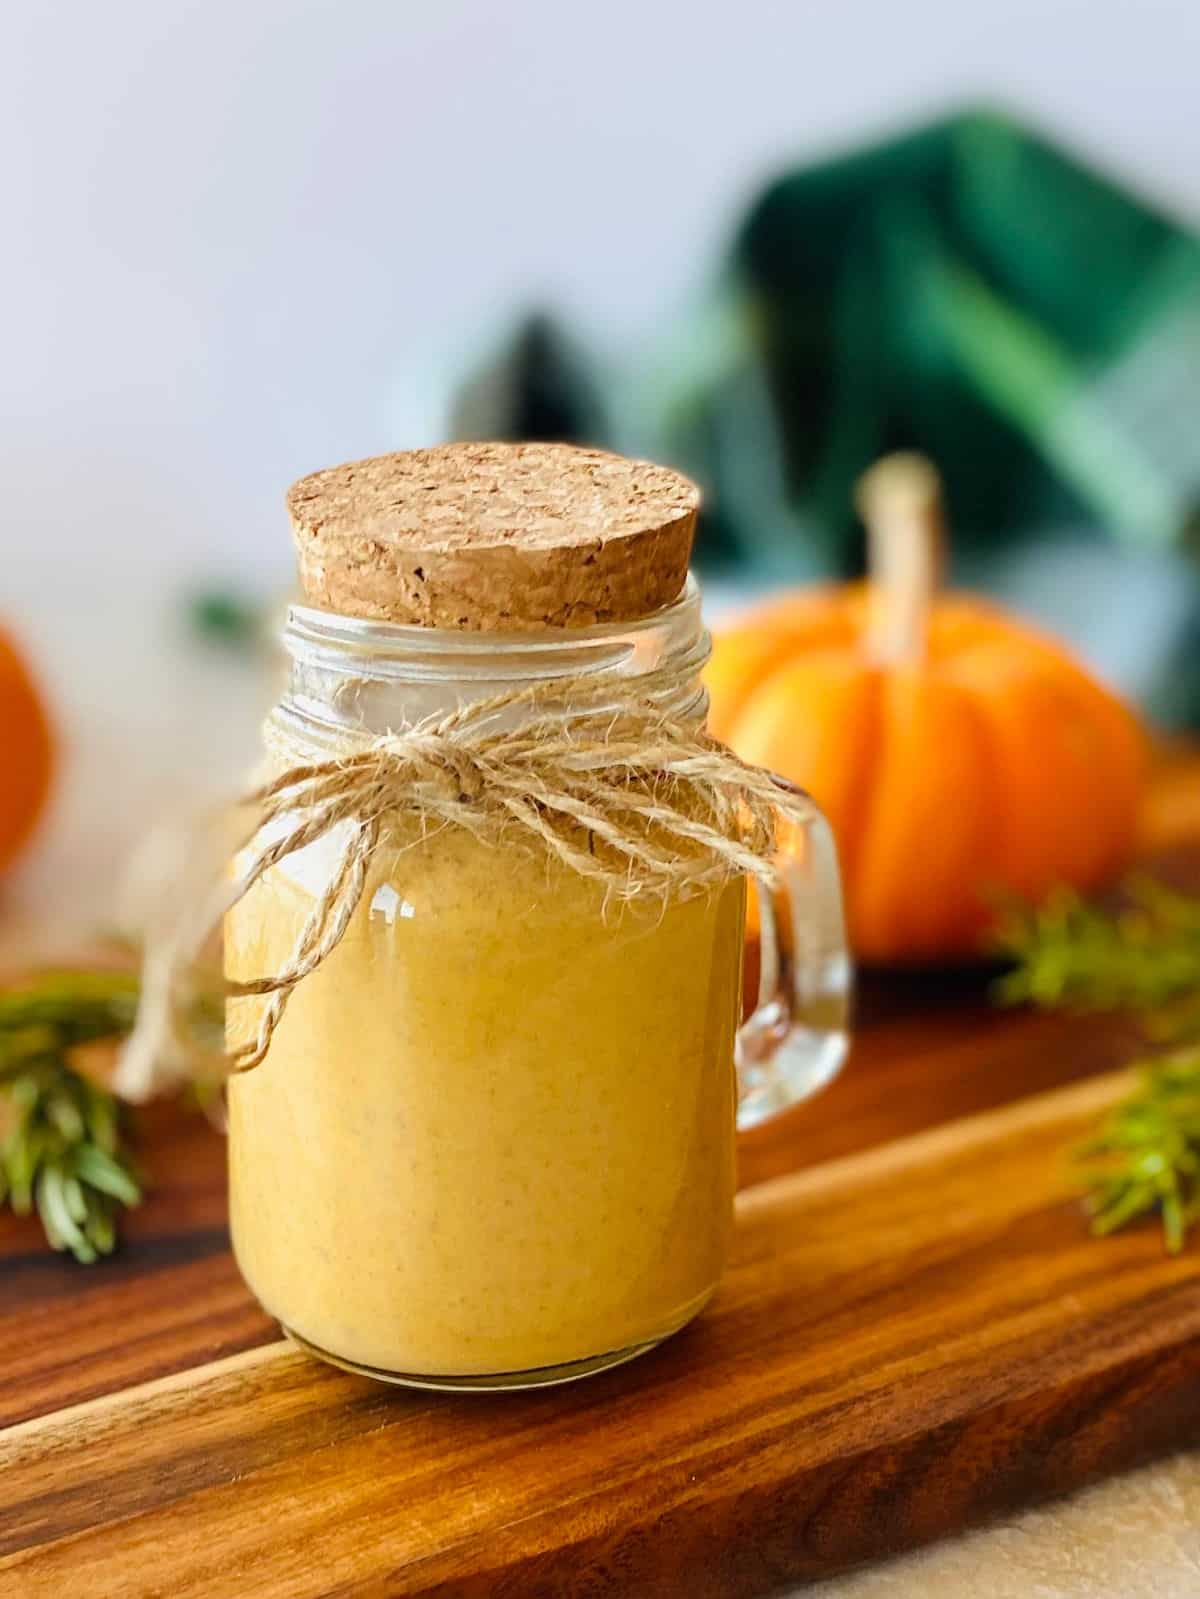 starbucks pumpkin sauce in a jar with a pumpkin and green napkin in the background.